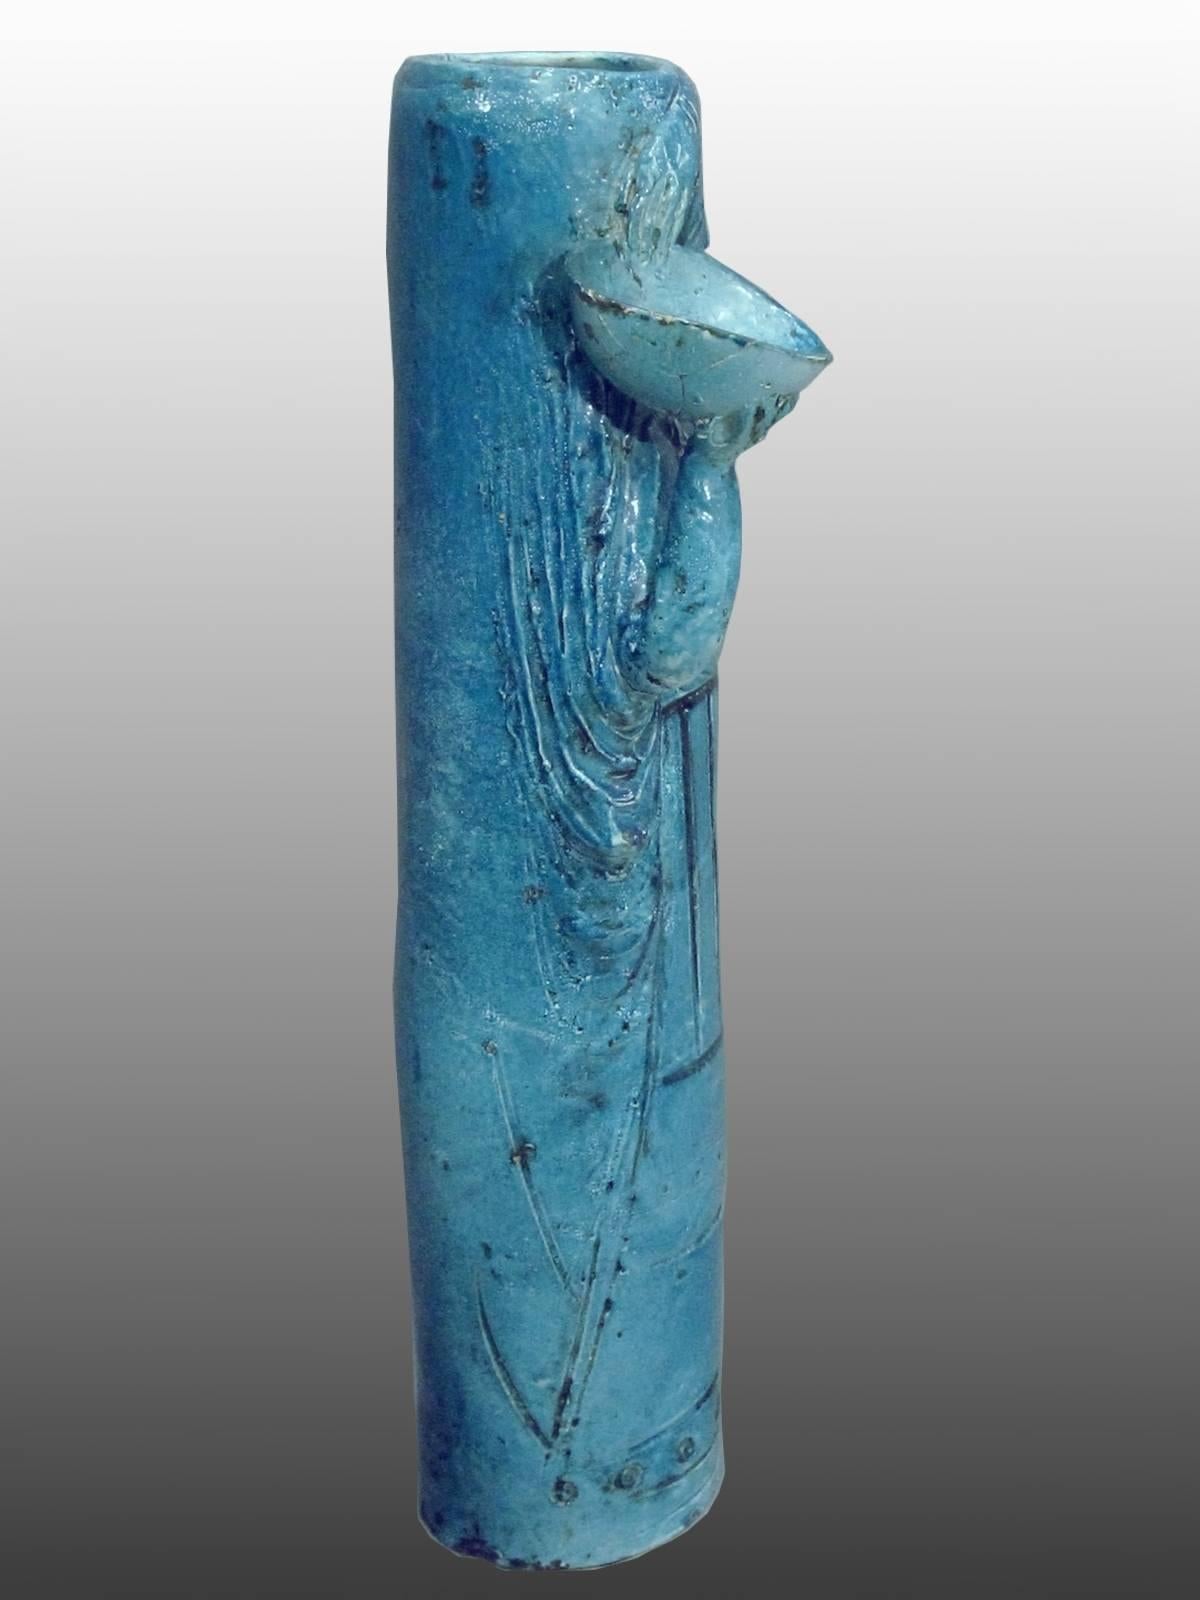 Vase-Sculpture in Blue Glazed Earthenware by Angelo Ungania, circa 1940 In Excellent Condition For Sale In Paris, FR